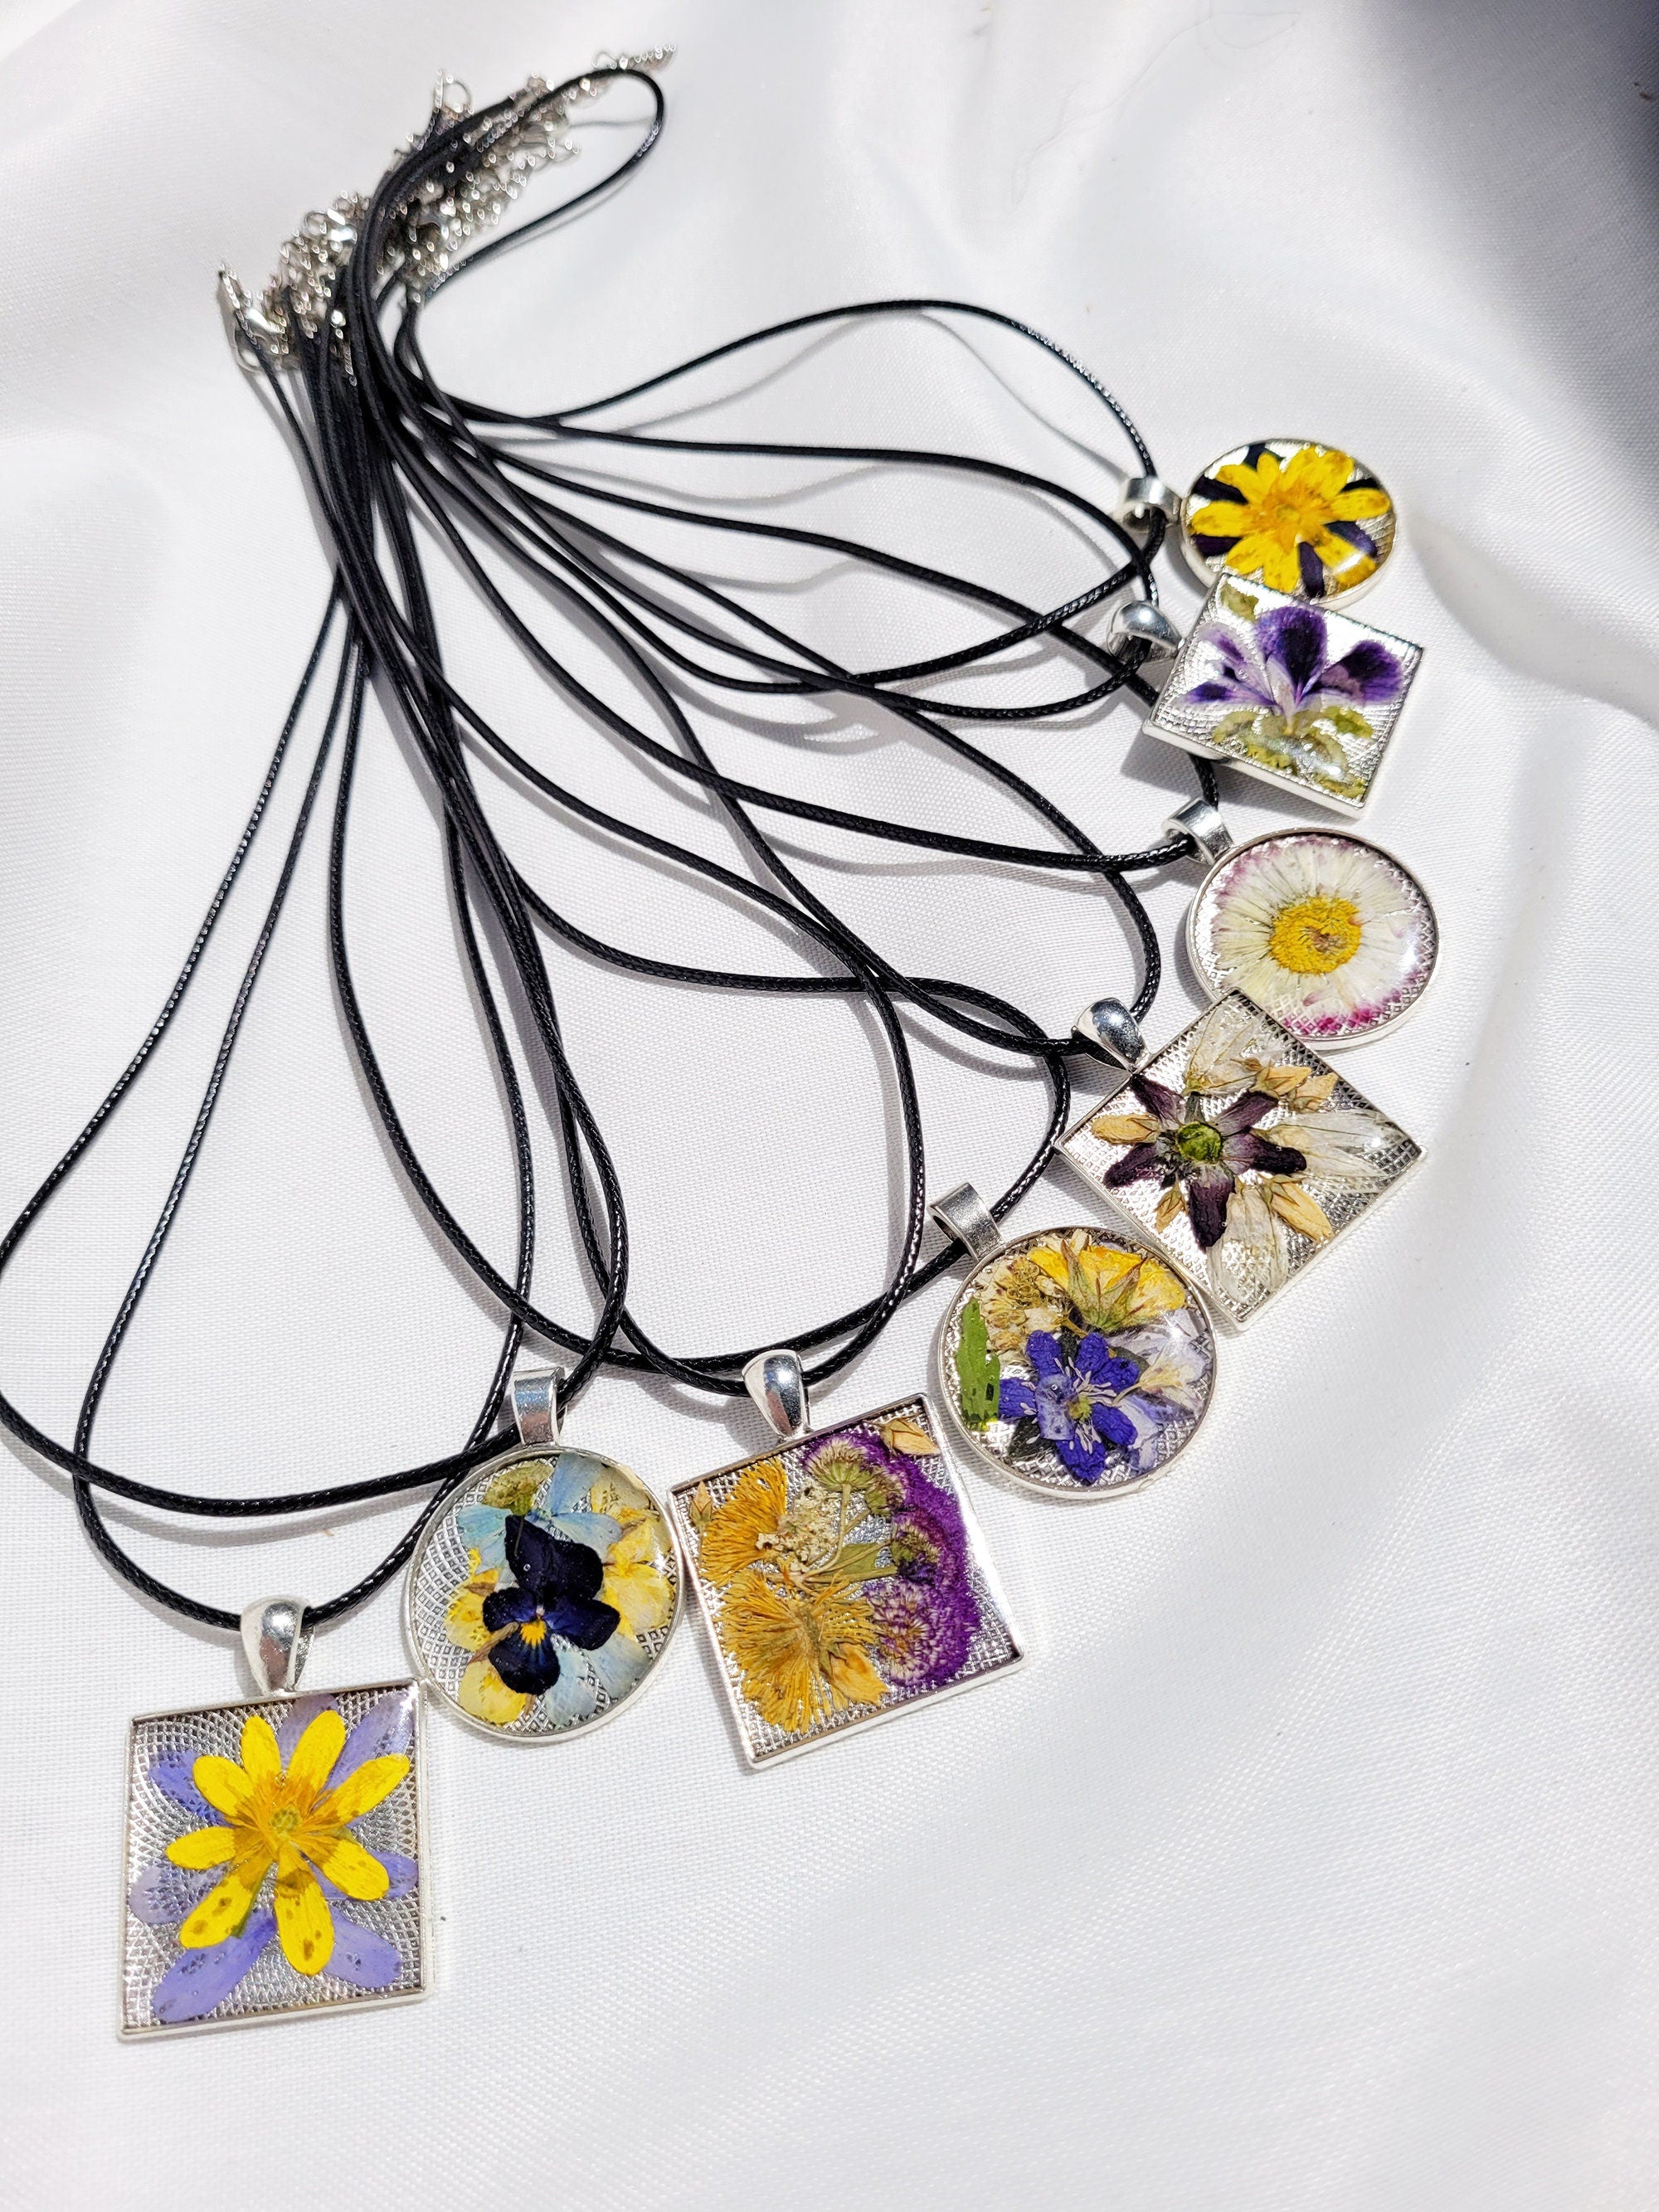 Handmade pendant, Pressed flower jewelry, Dried flower resin square pendant necklace, floral herbarium collar,  S4